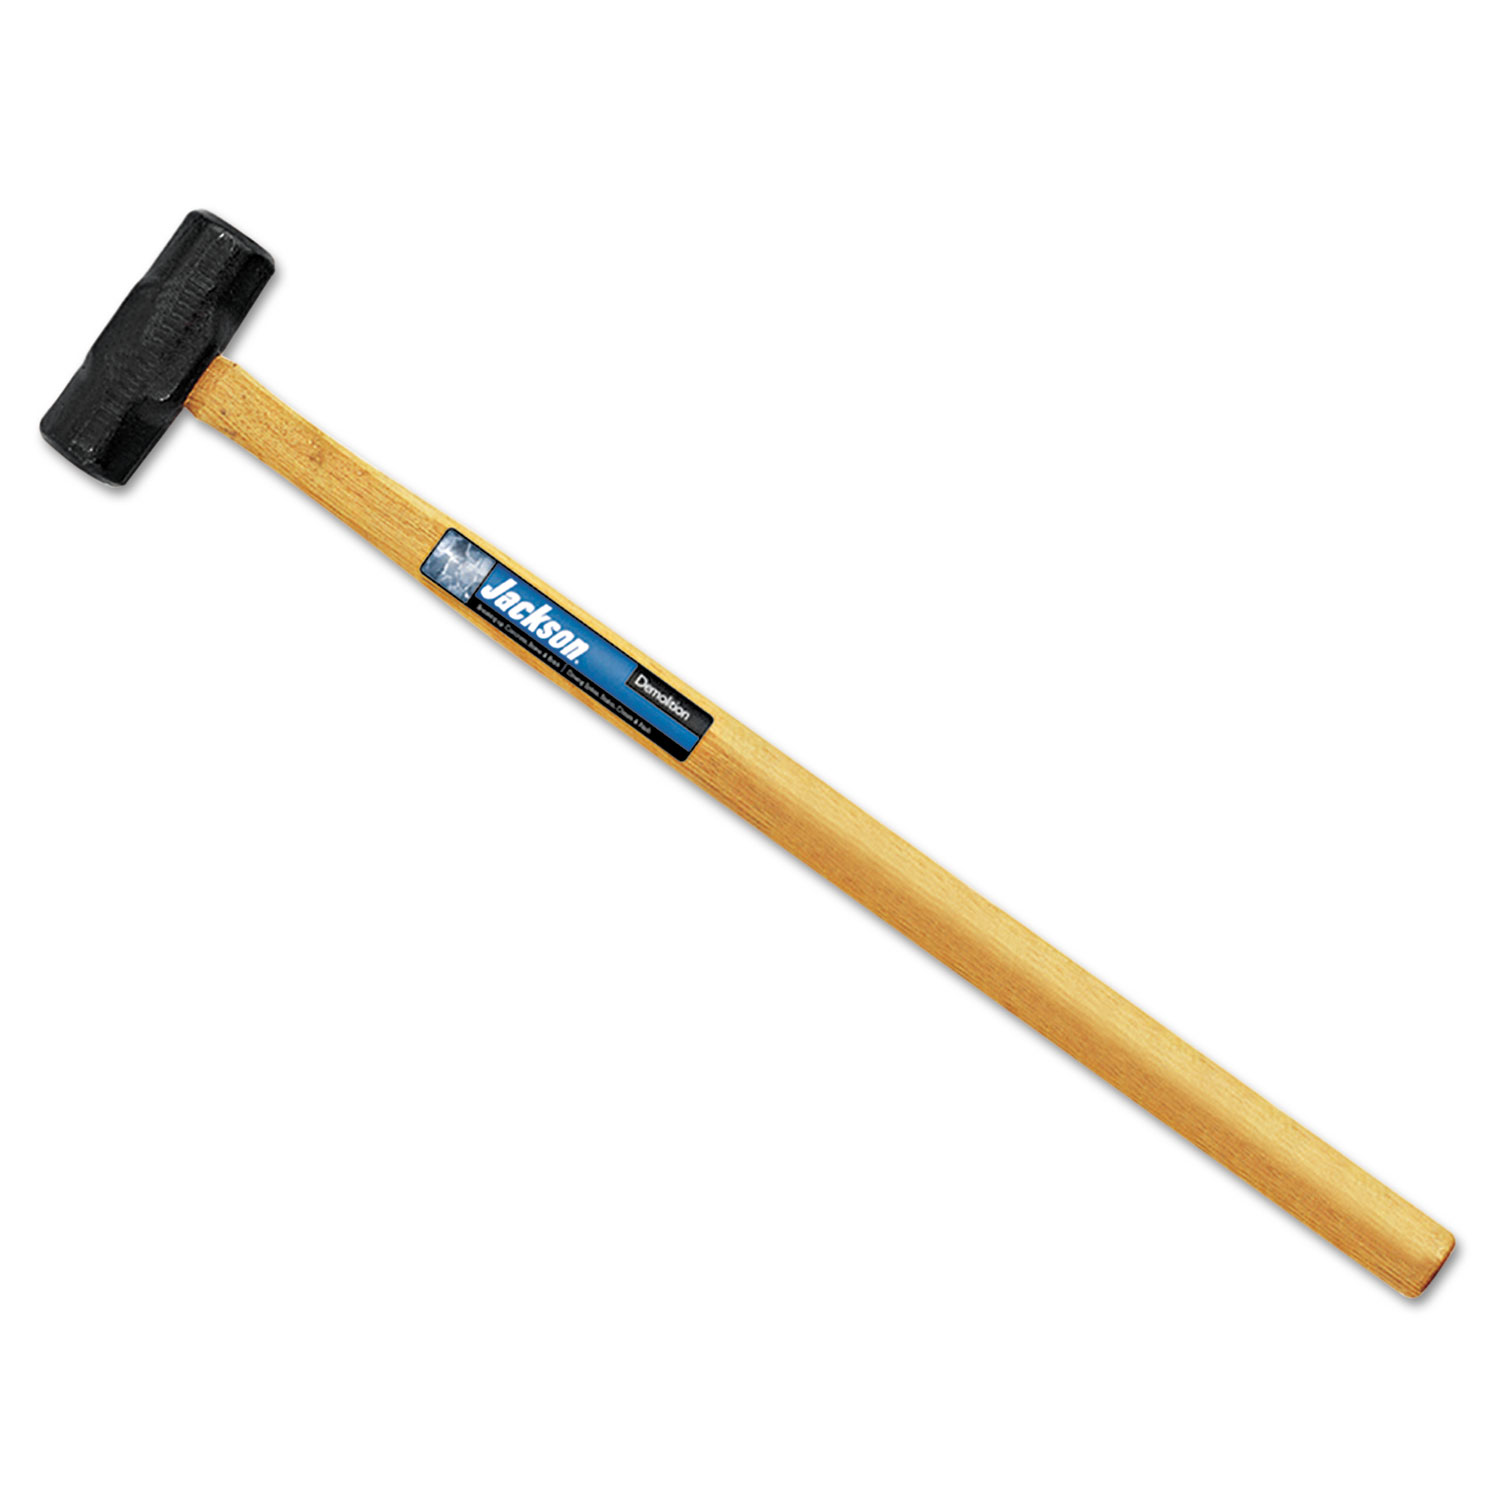 Sledge Hammer, 10lb, 36in Hickory Handle